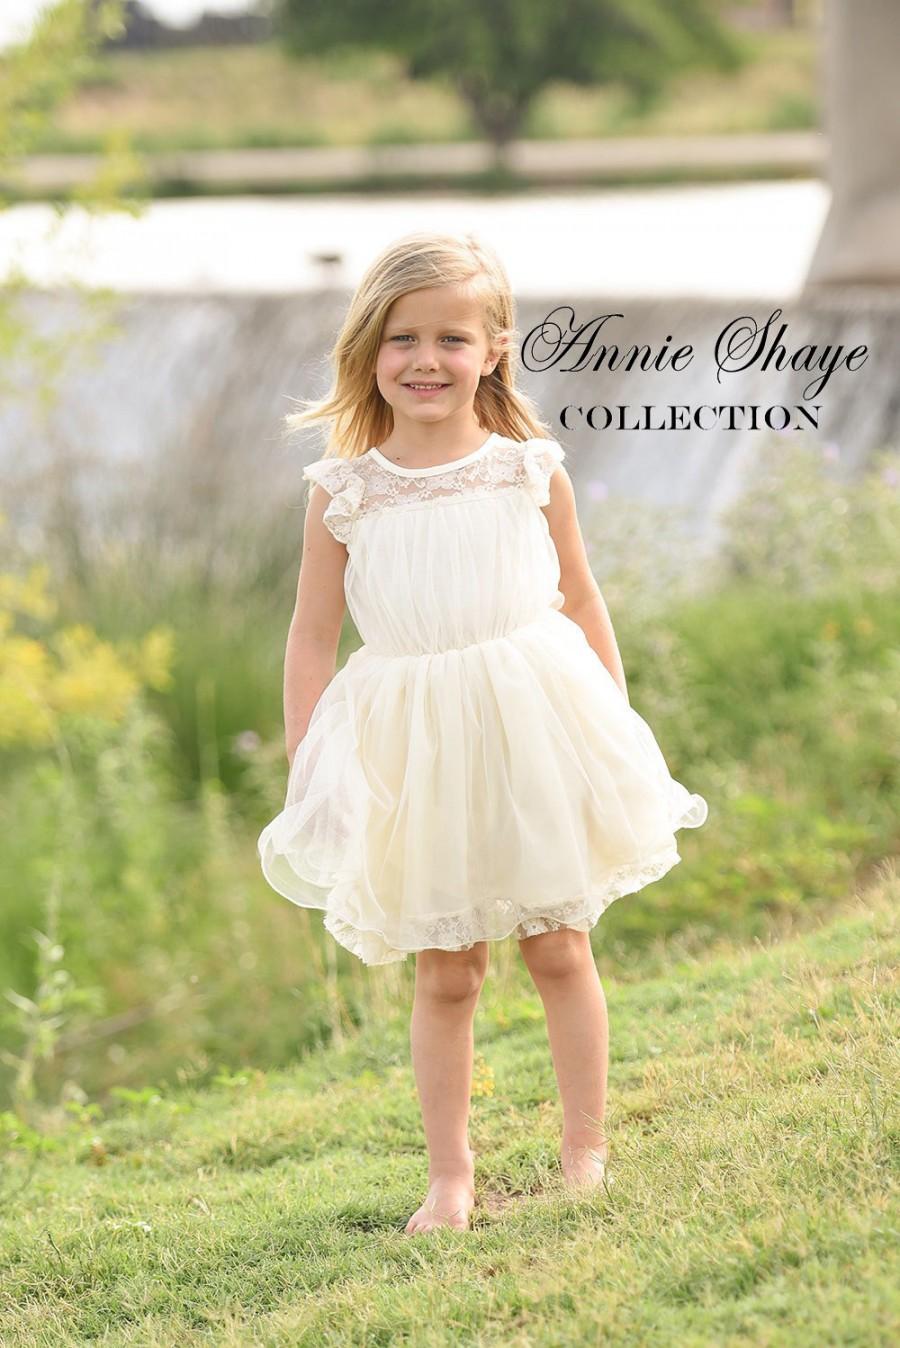 Wedding - Olivia Dress by Annie Shaye - flower girl dress ivory, lace toddler dress made for girls ages 9-12M,1t,2t,3t,4t,5,6,7,8,9,10,11,12,13,14